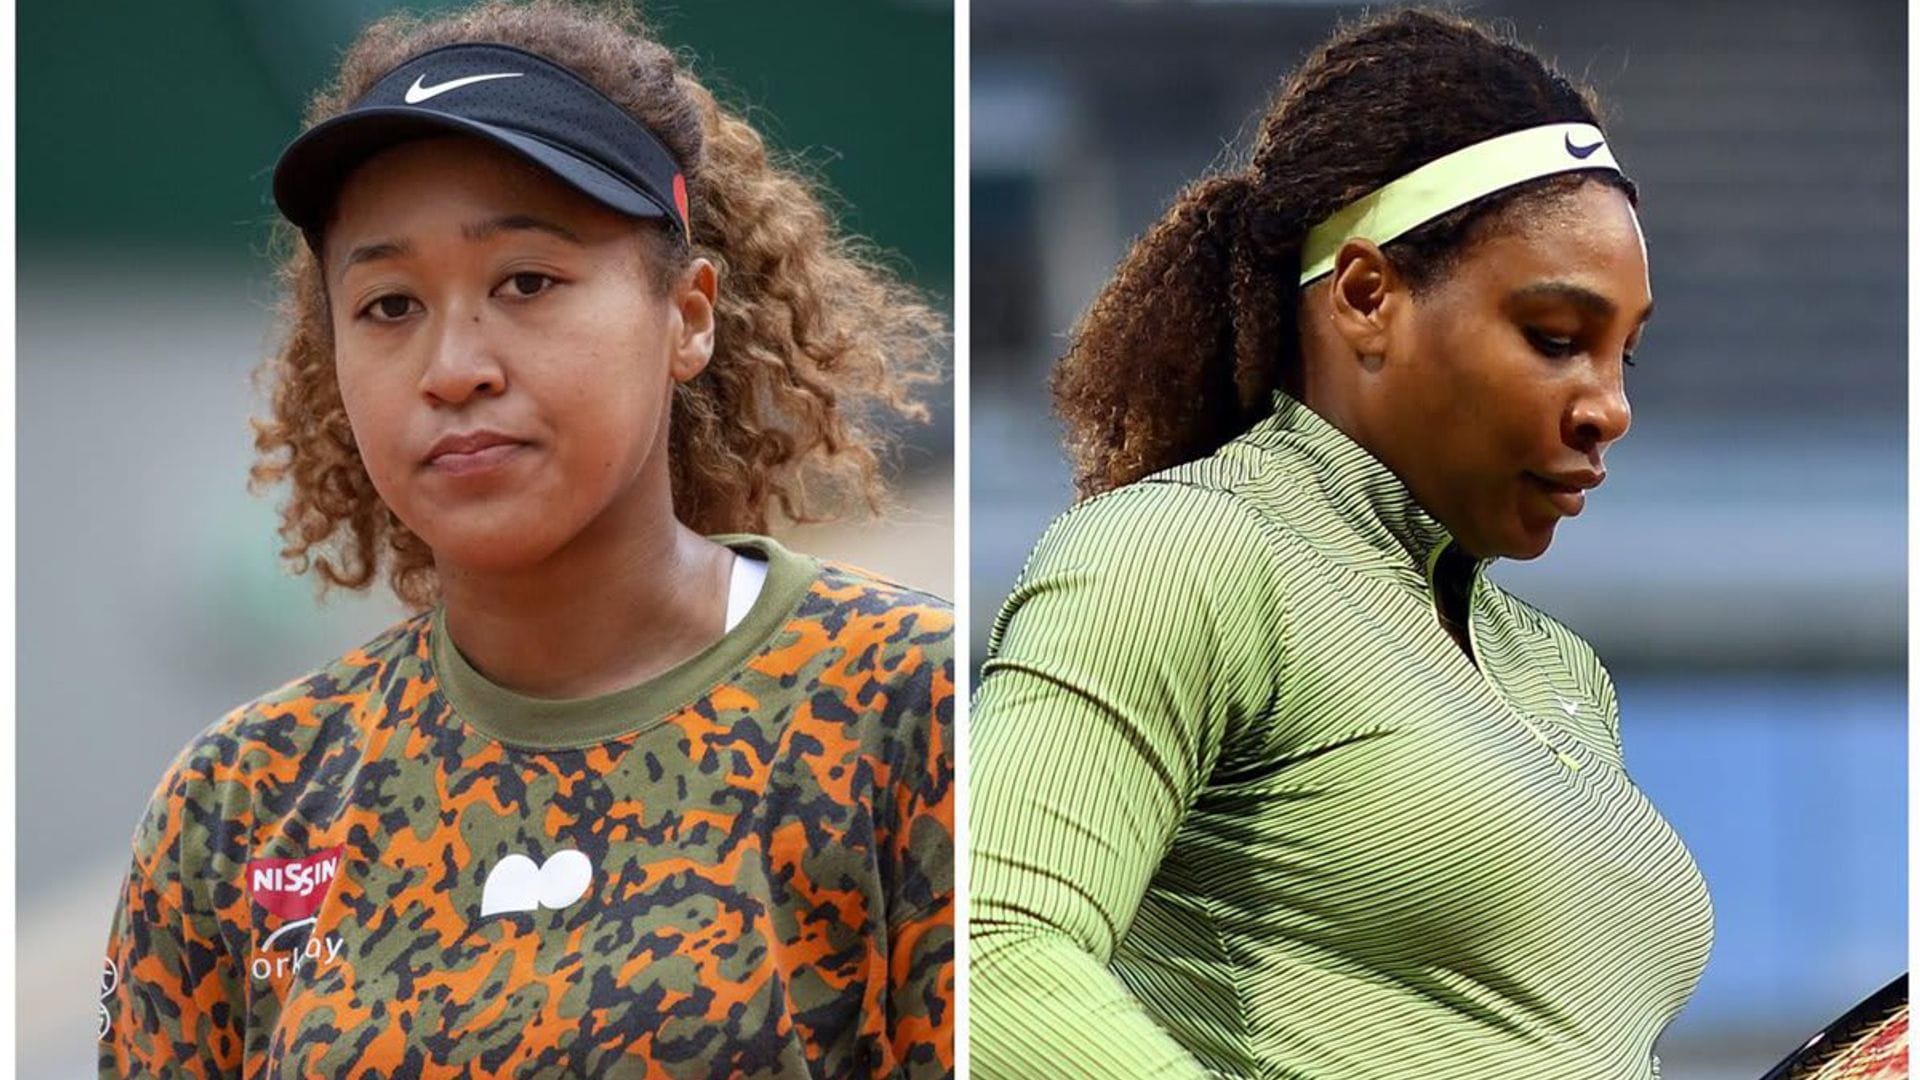 Serena Williams shows support for Naomi Osaka: ‘I wish I could give her a hug’